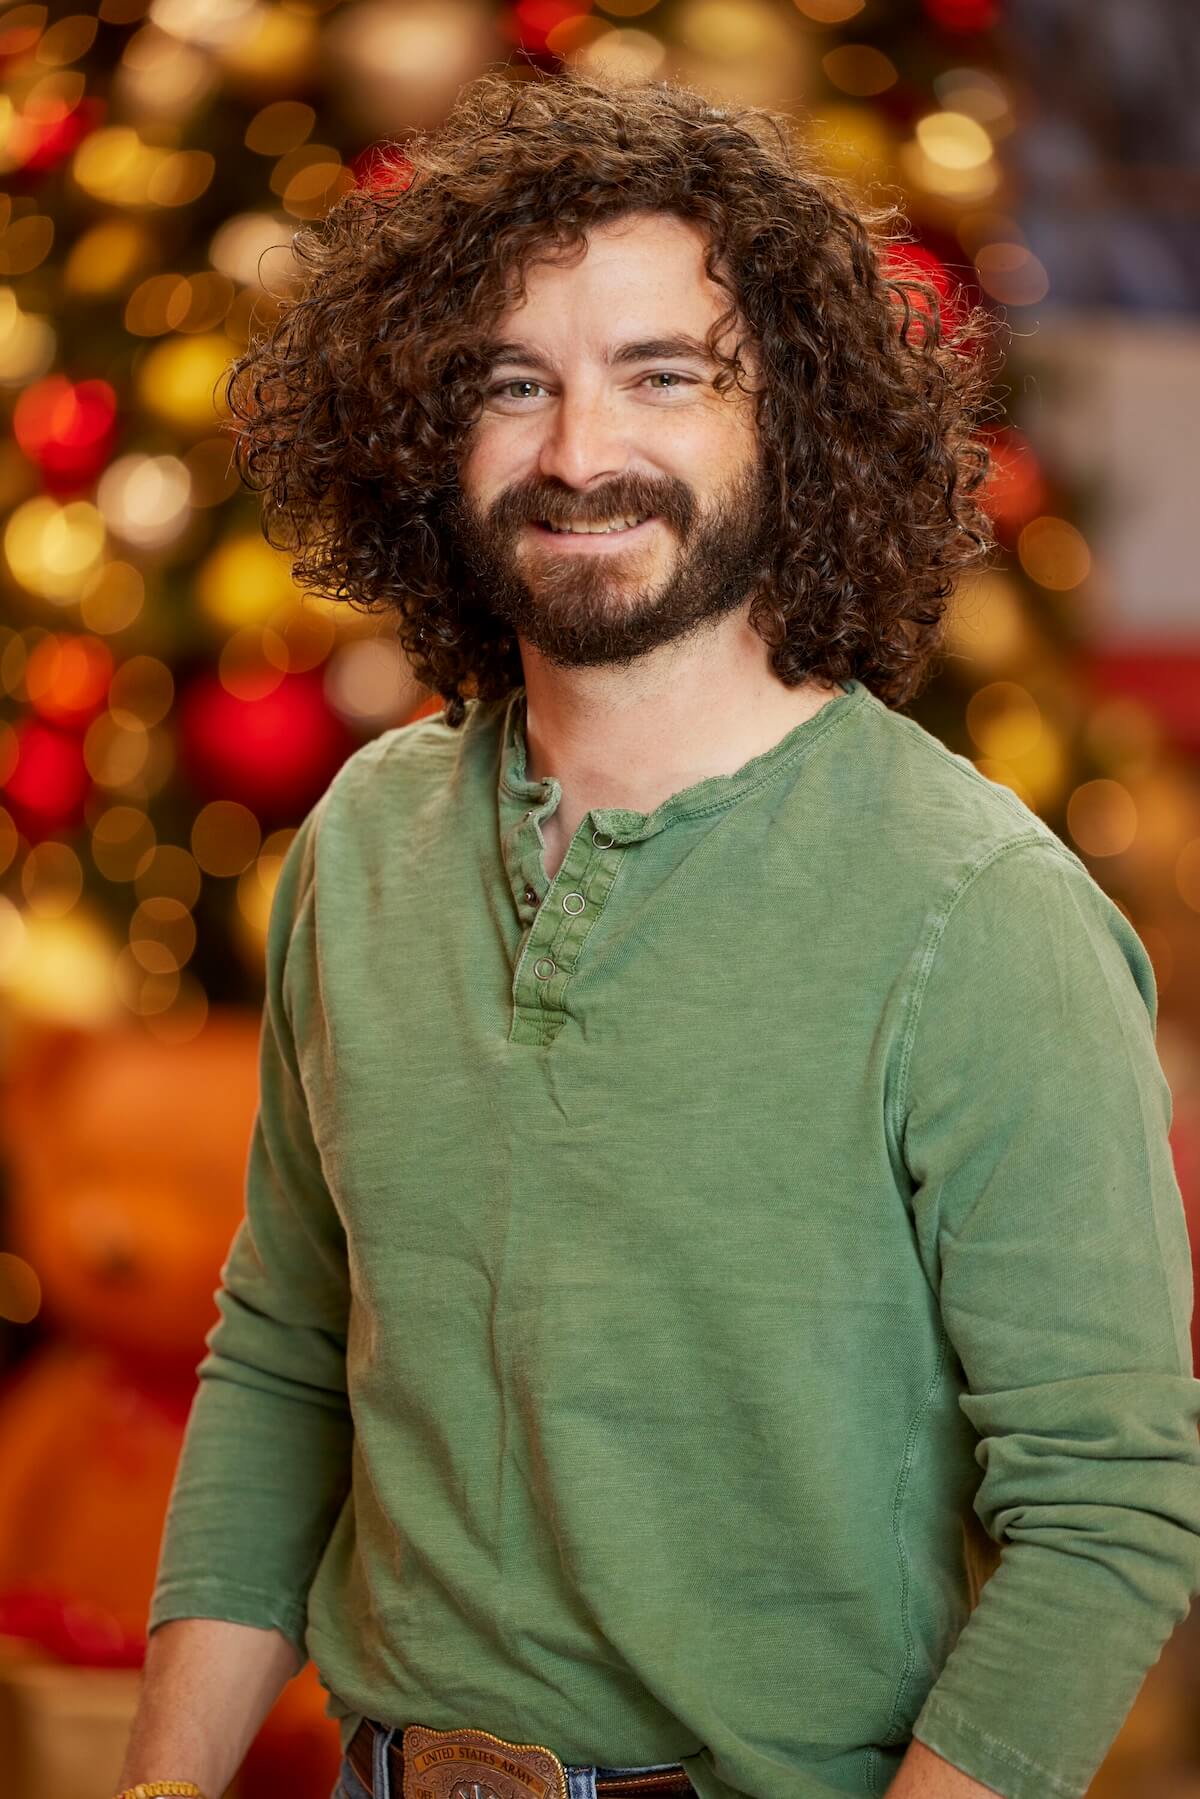 Cameron Hardin of 'Big Brother Reindeer Games' posing in front of Christmas decorations